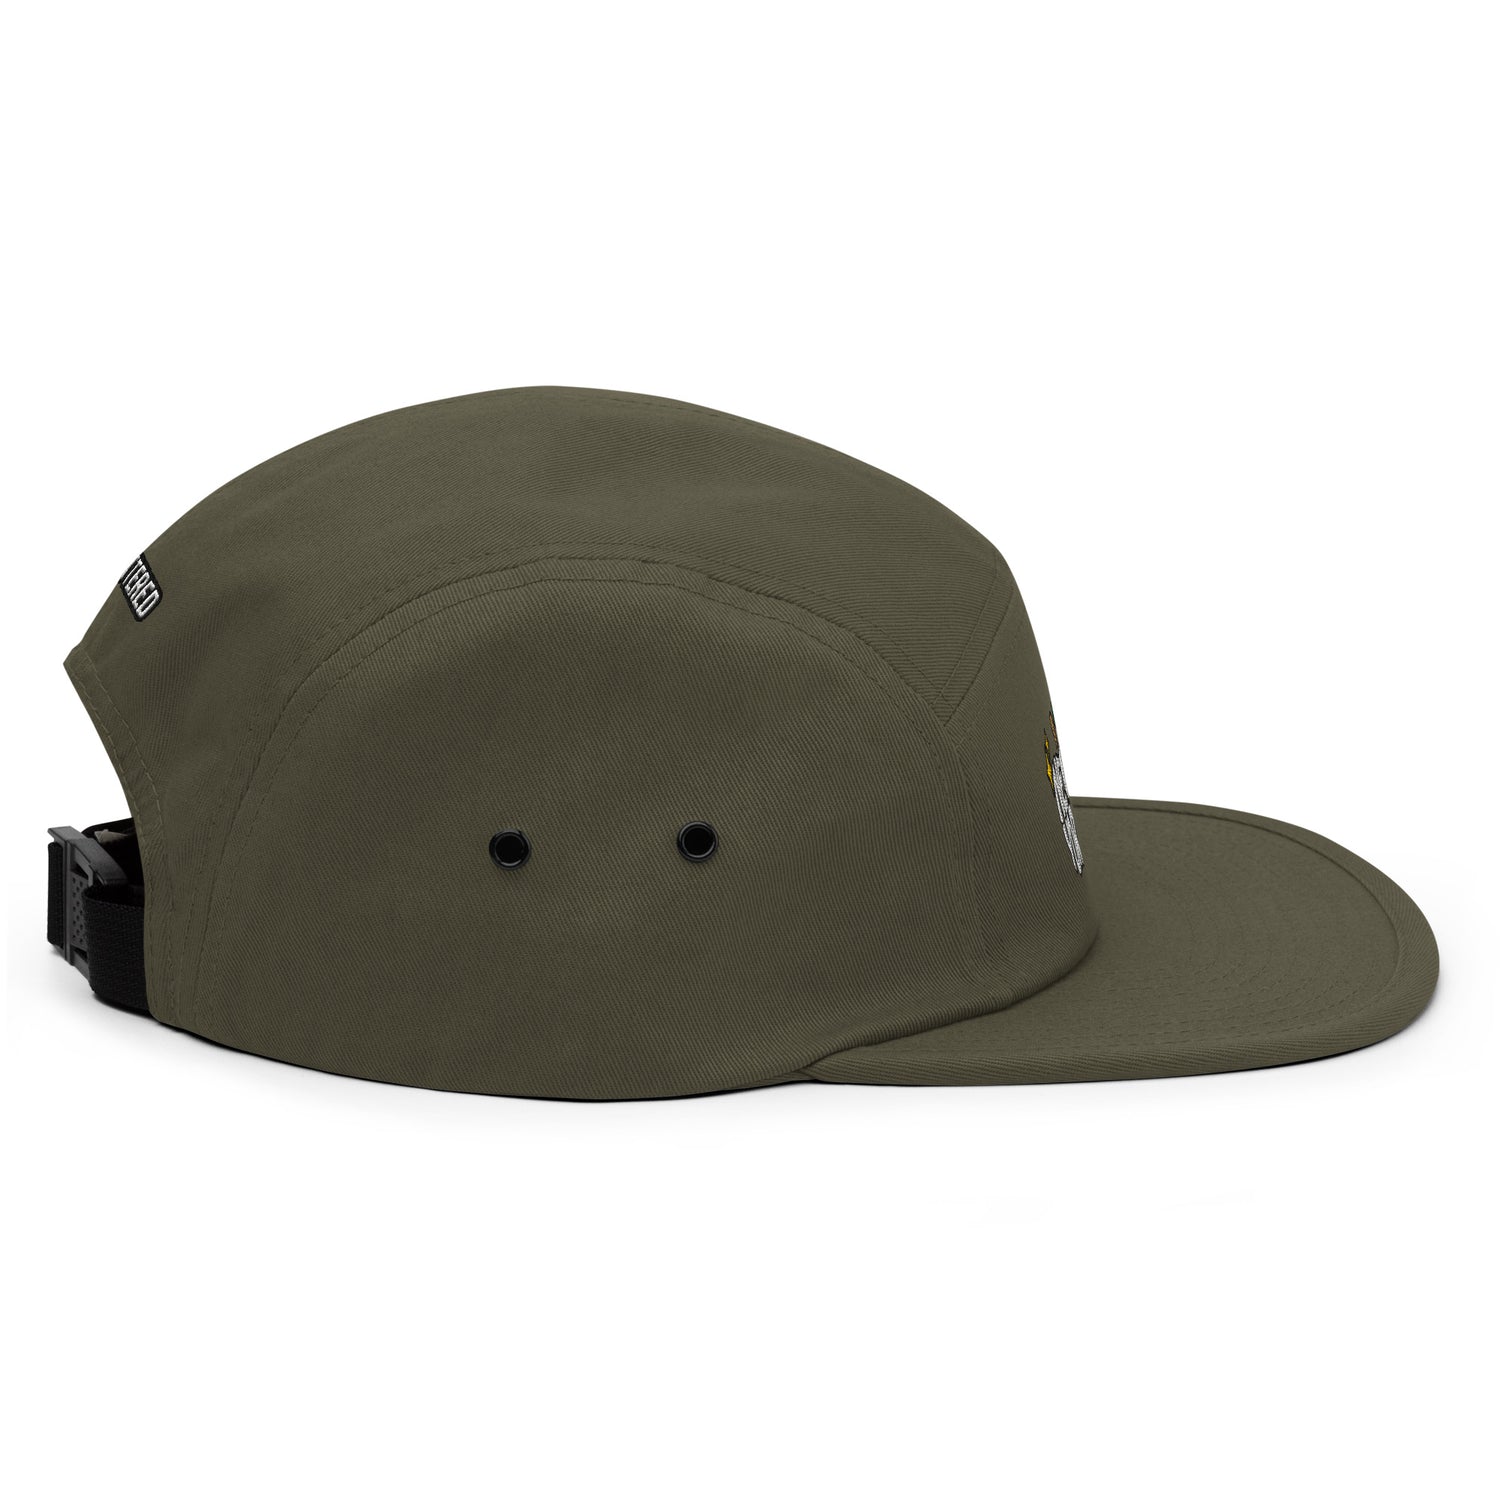 New York Apple Logo Embroidered Olive Five Panel Hat Scattered Streetwear